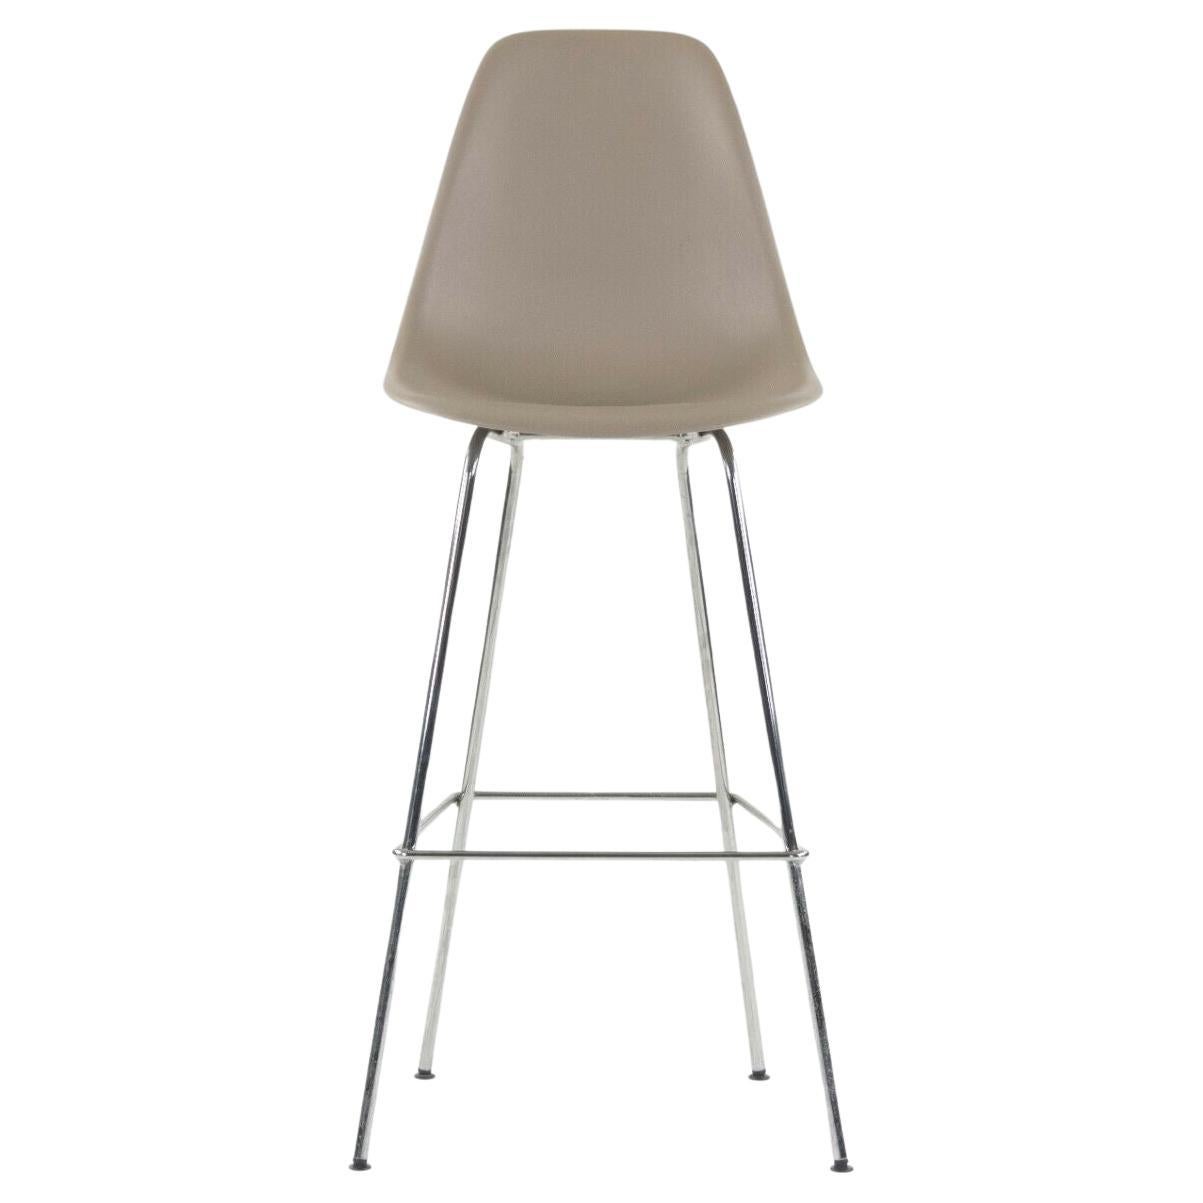 Ray and Charles Eames Herman Miller Molded Shell Bar Stool Chair Sparrow Grey